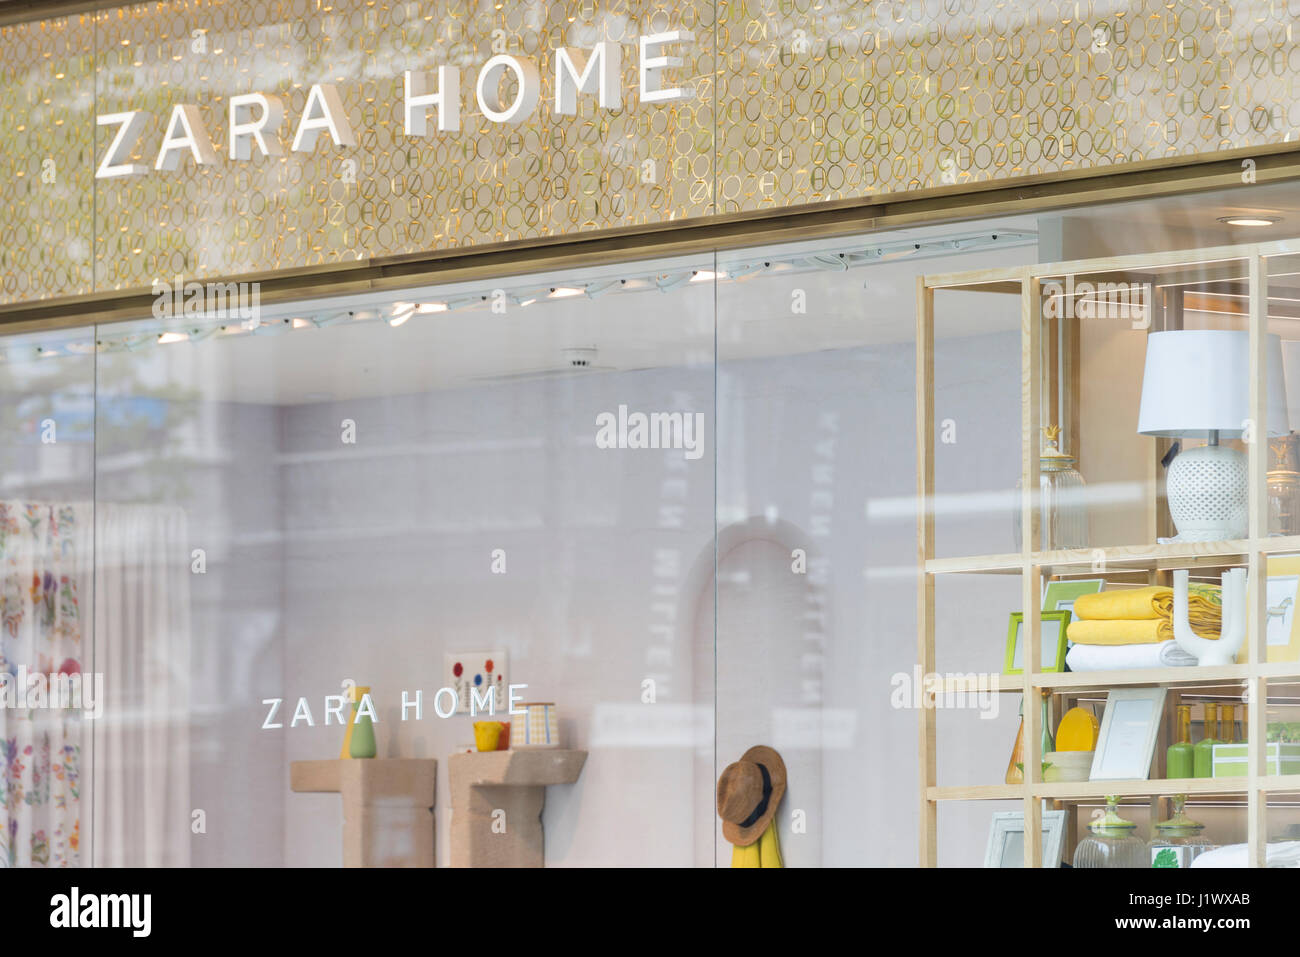 Zara Home store at the Meir in Antwerp Stock Photo - Alamy